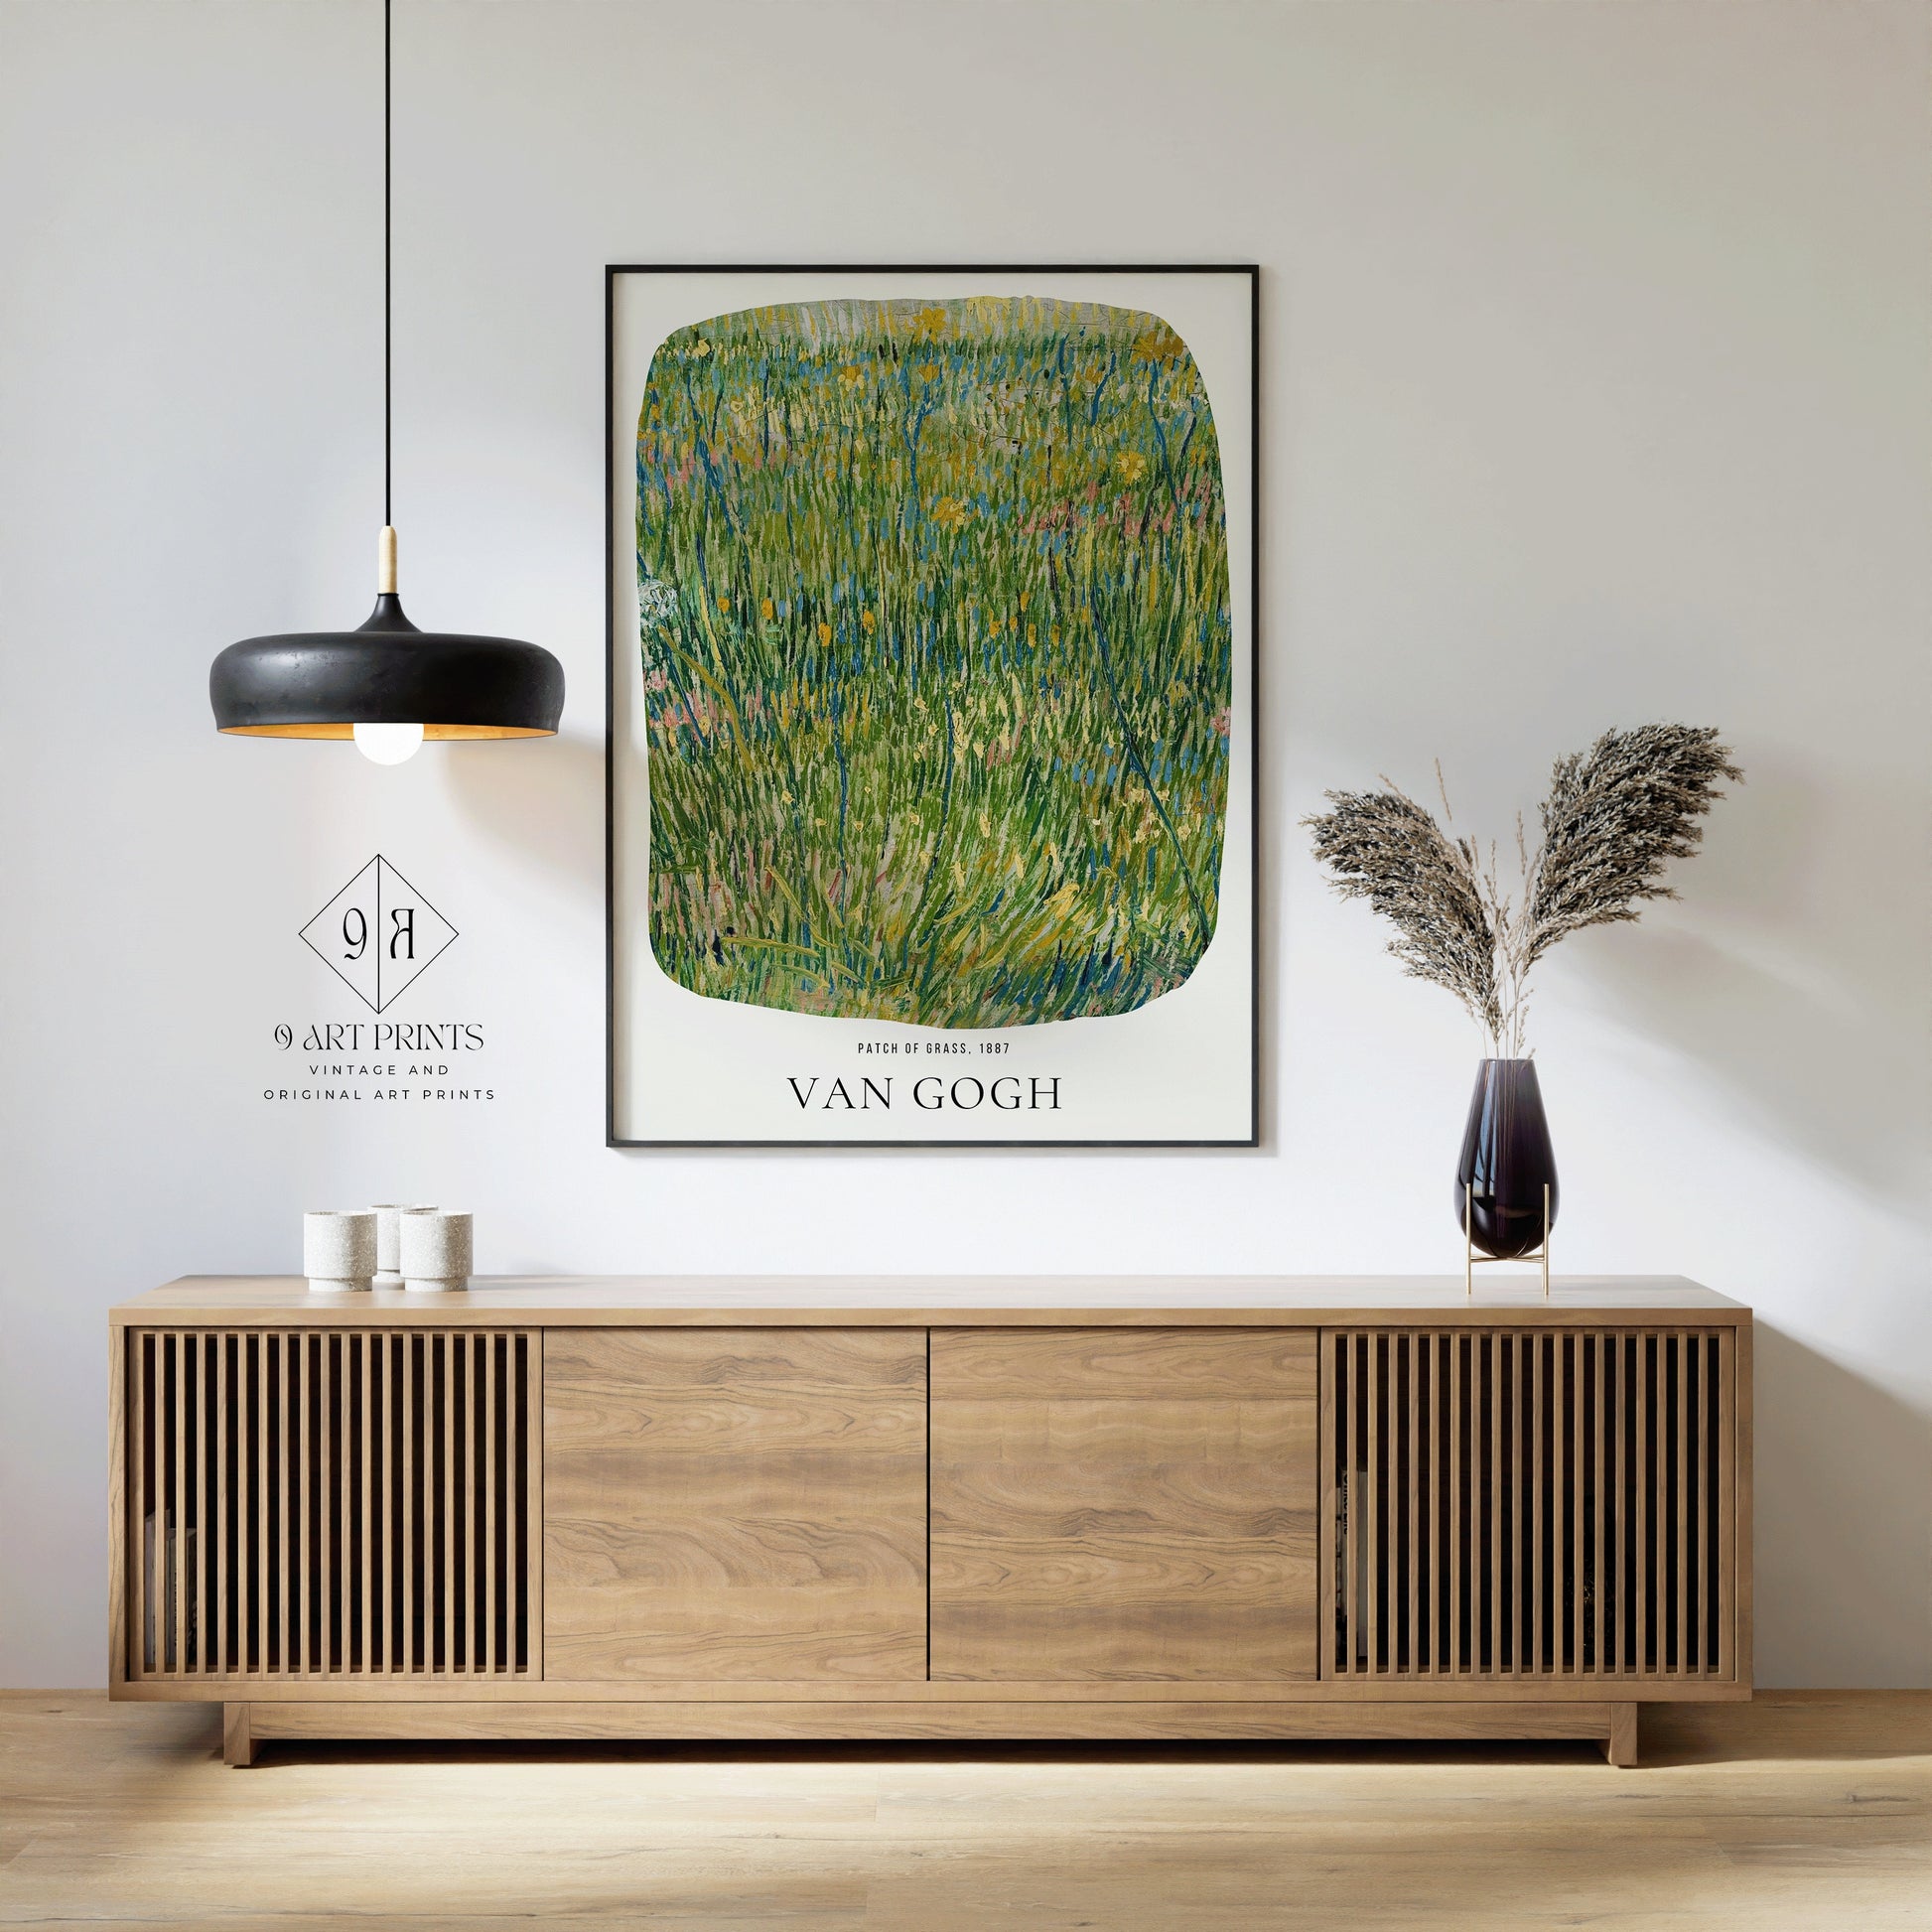 Van Gogh Patch of Grass Green Exhibition Museum Poster Fine Art Painting Vintage Famous Ready to hang Framed Home Office Decor Gift Idea